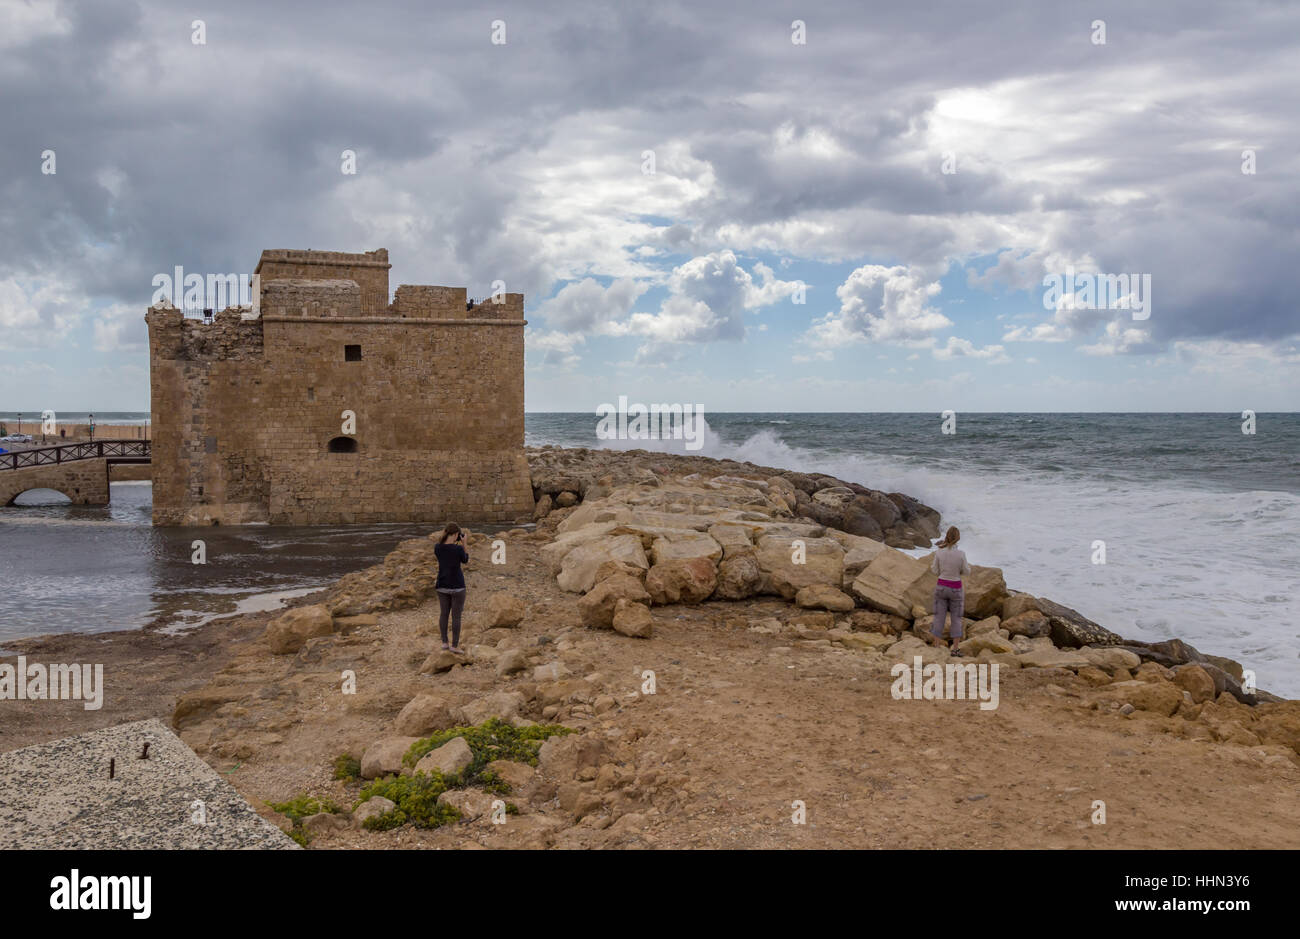 Paphos castle on a stormy day.  Stormy summer's day with cloudy sky and crashing waves. Stock Photo